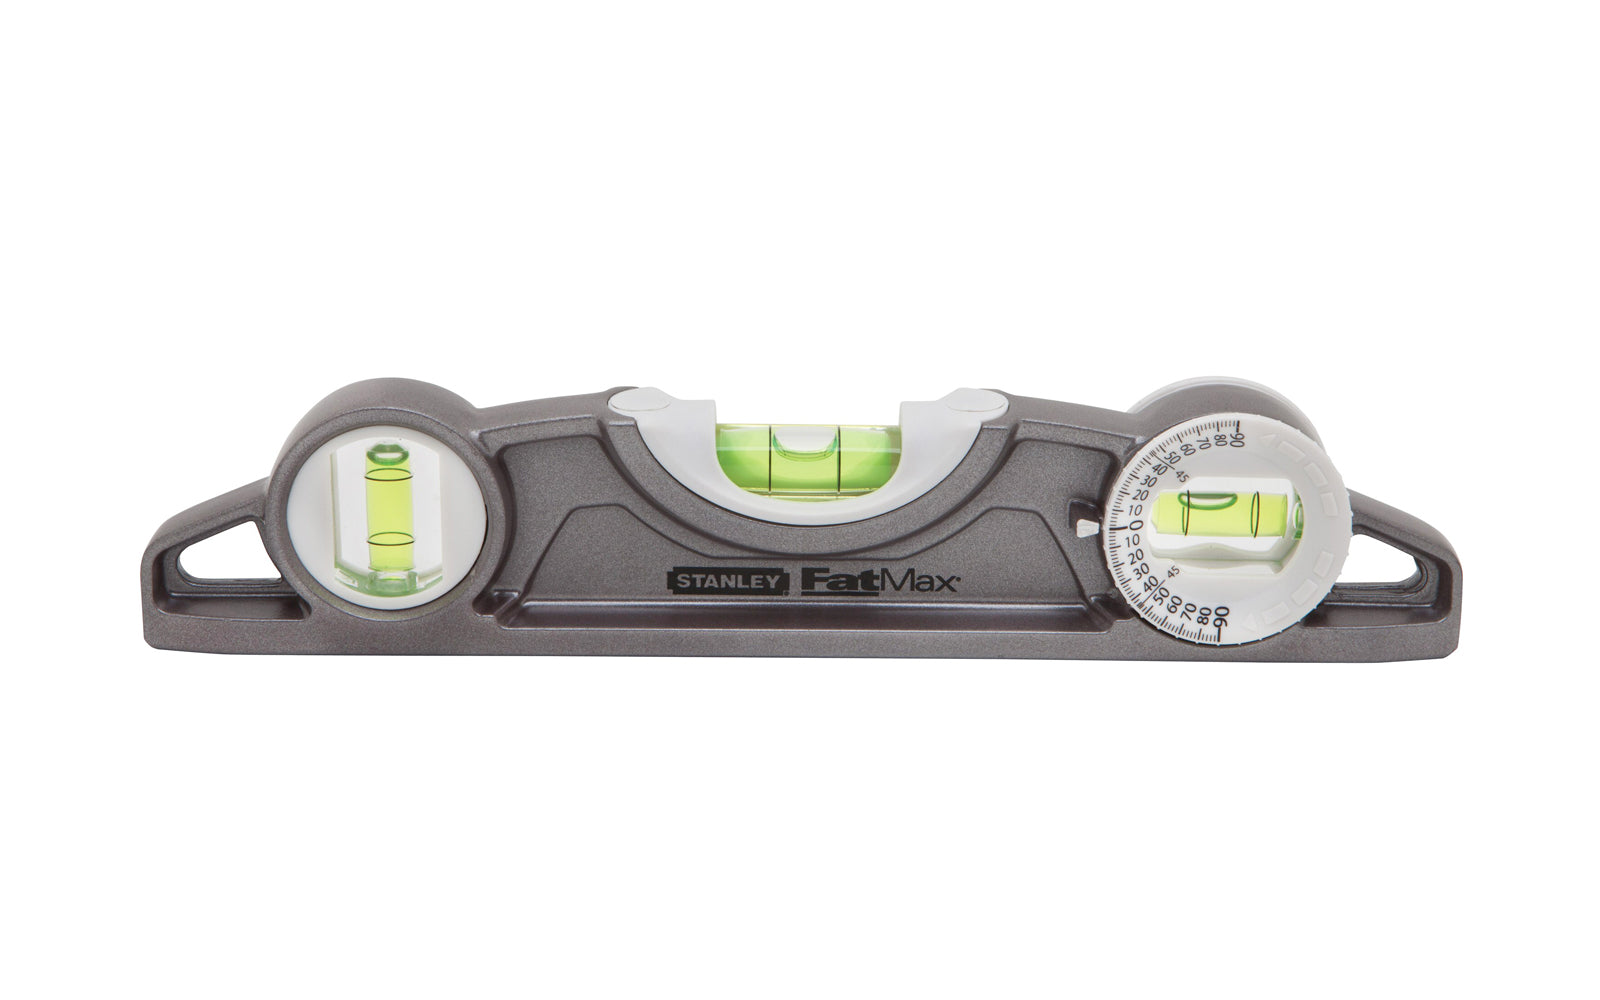 Stanley 9" Fatmax Magnetic Torpedo Level features a die-cast aluminum body for long lasting durability. Solid block vial provides accuracy of 0.0005in/in. (0.5mm/m), & a 180-degree rotating vial is designed to duplicate angles. Stanley Tools - Model No. 43-609. Pipe groove for use on rounded surfaces. 076174436099